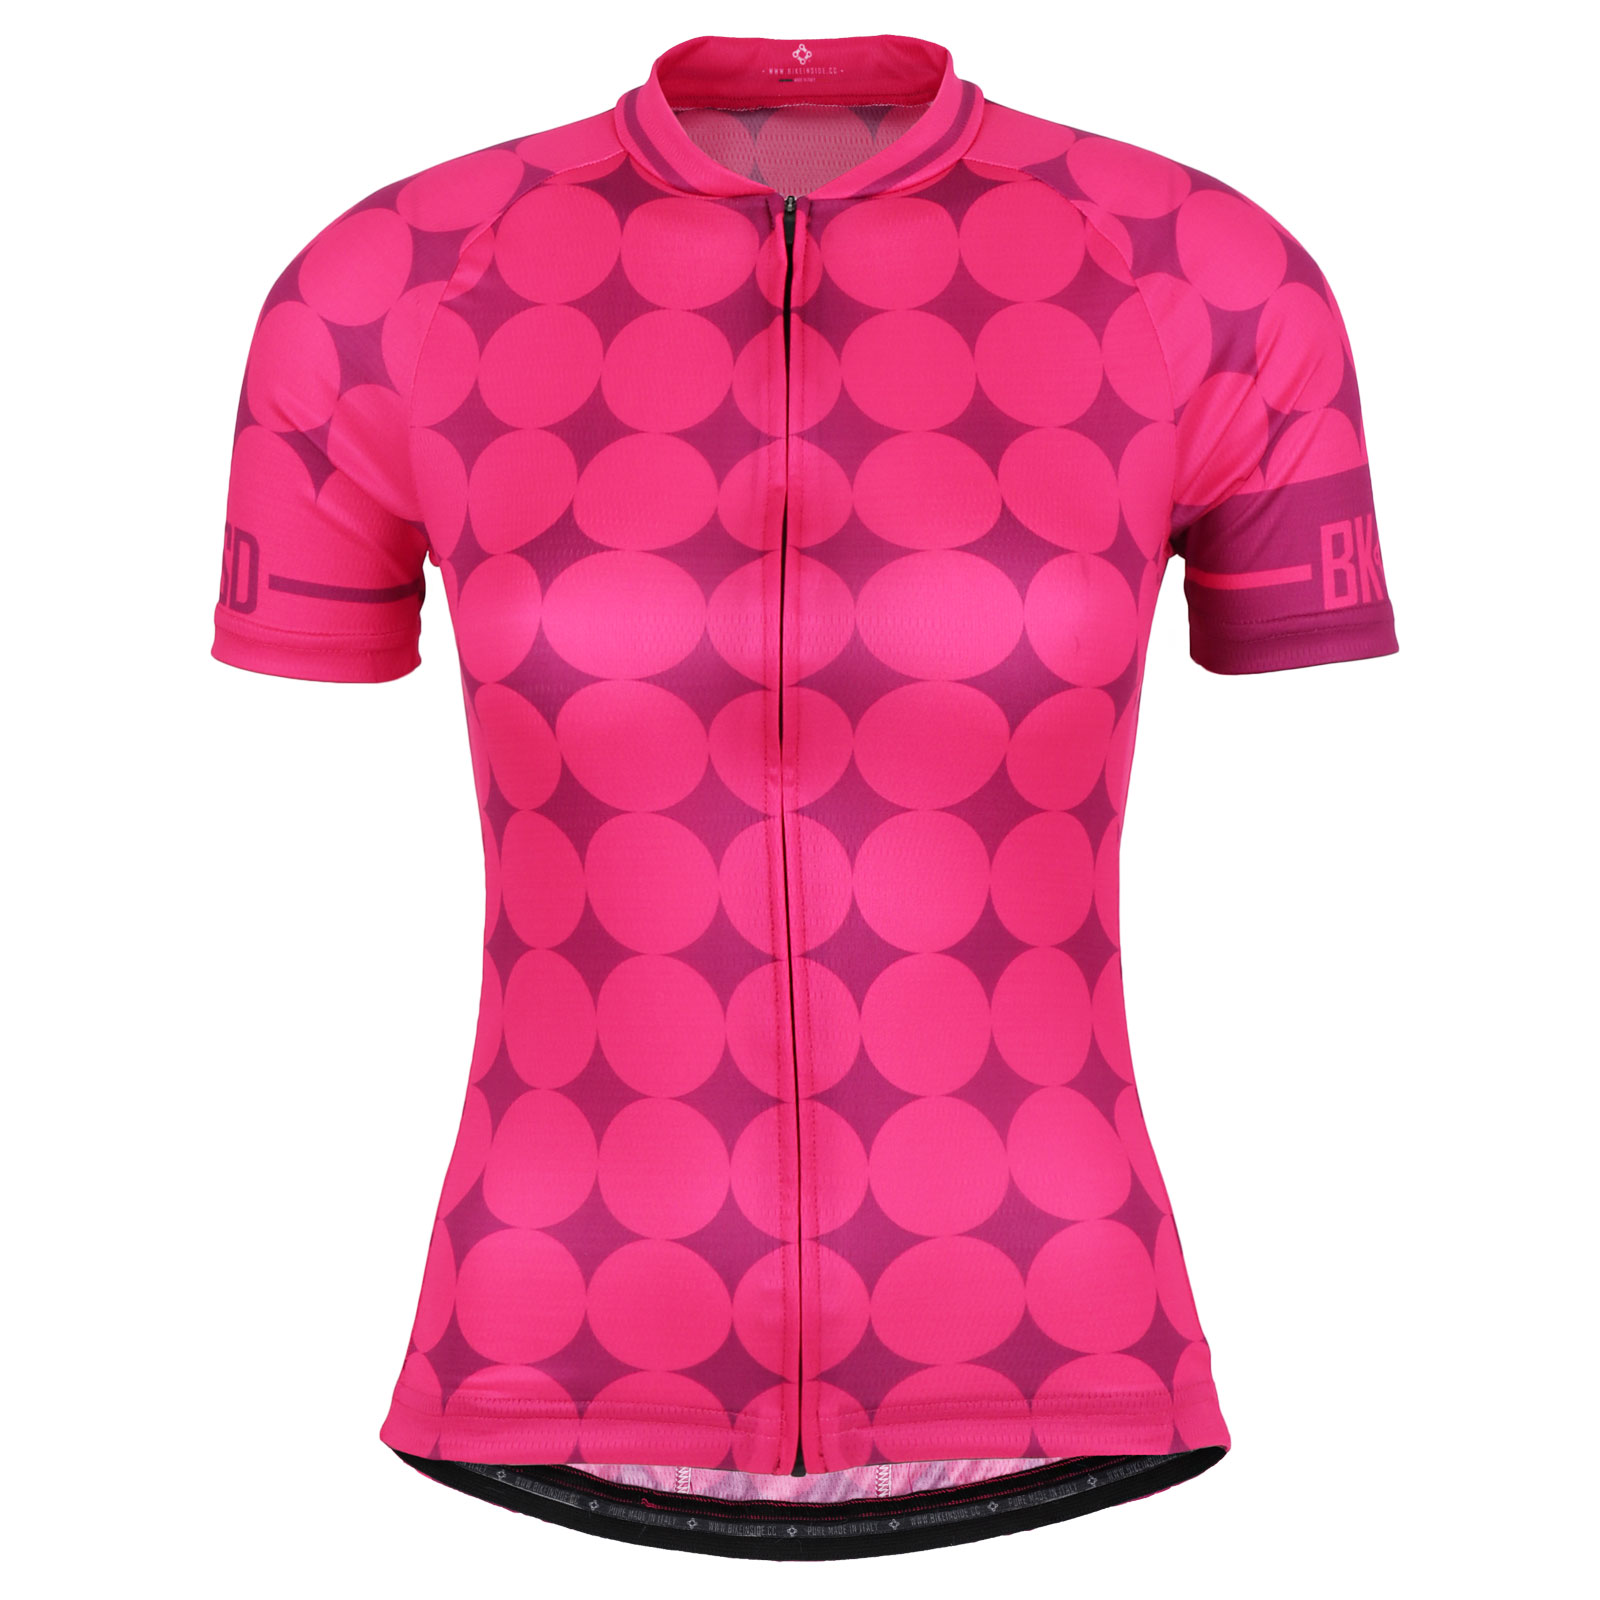 Productfoto van Bike Inside Cycling Wear Pure Style Women&#039;s Short Sleeve Jersey - Pink Rounded